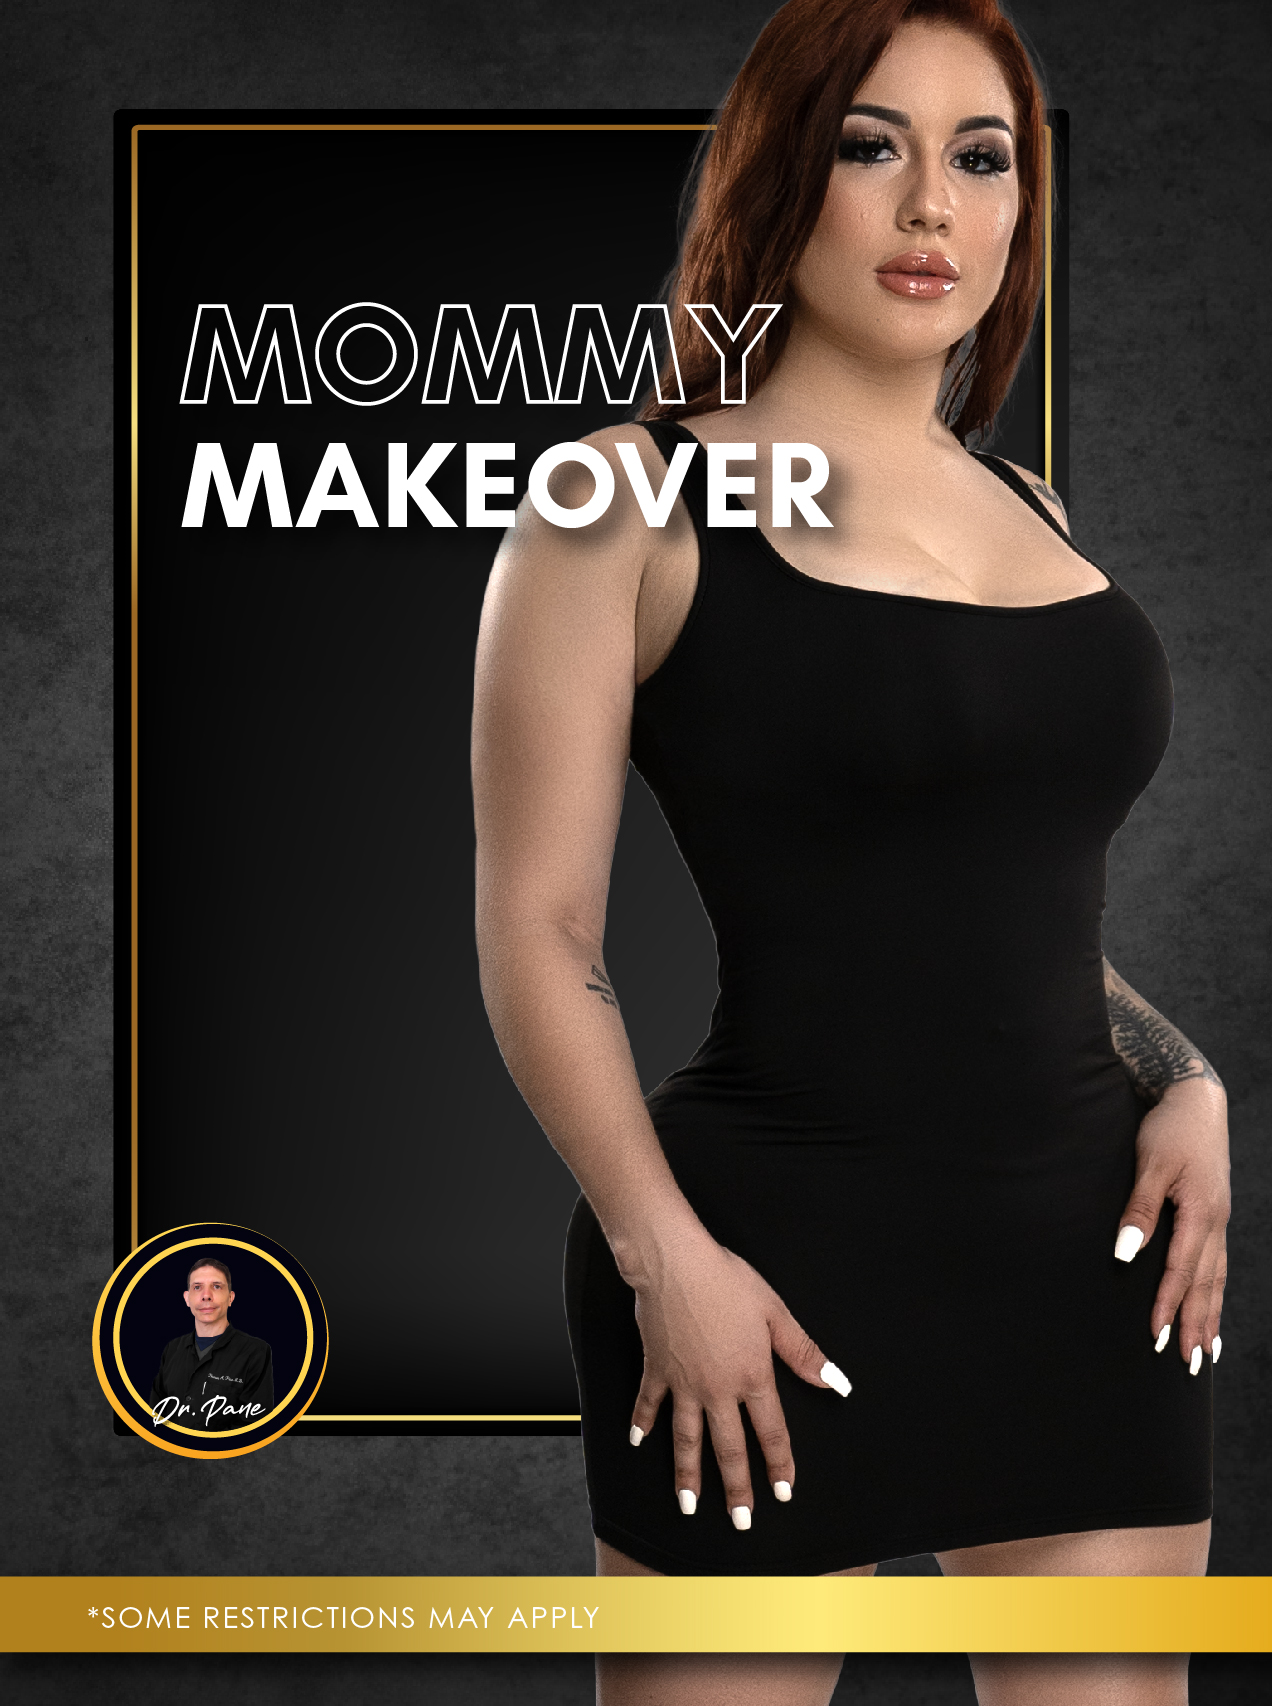 Mommy Makeover (TT and Breast Lift) with Dr Pane